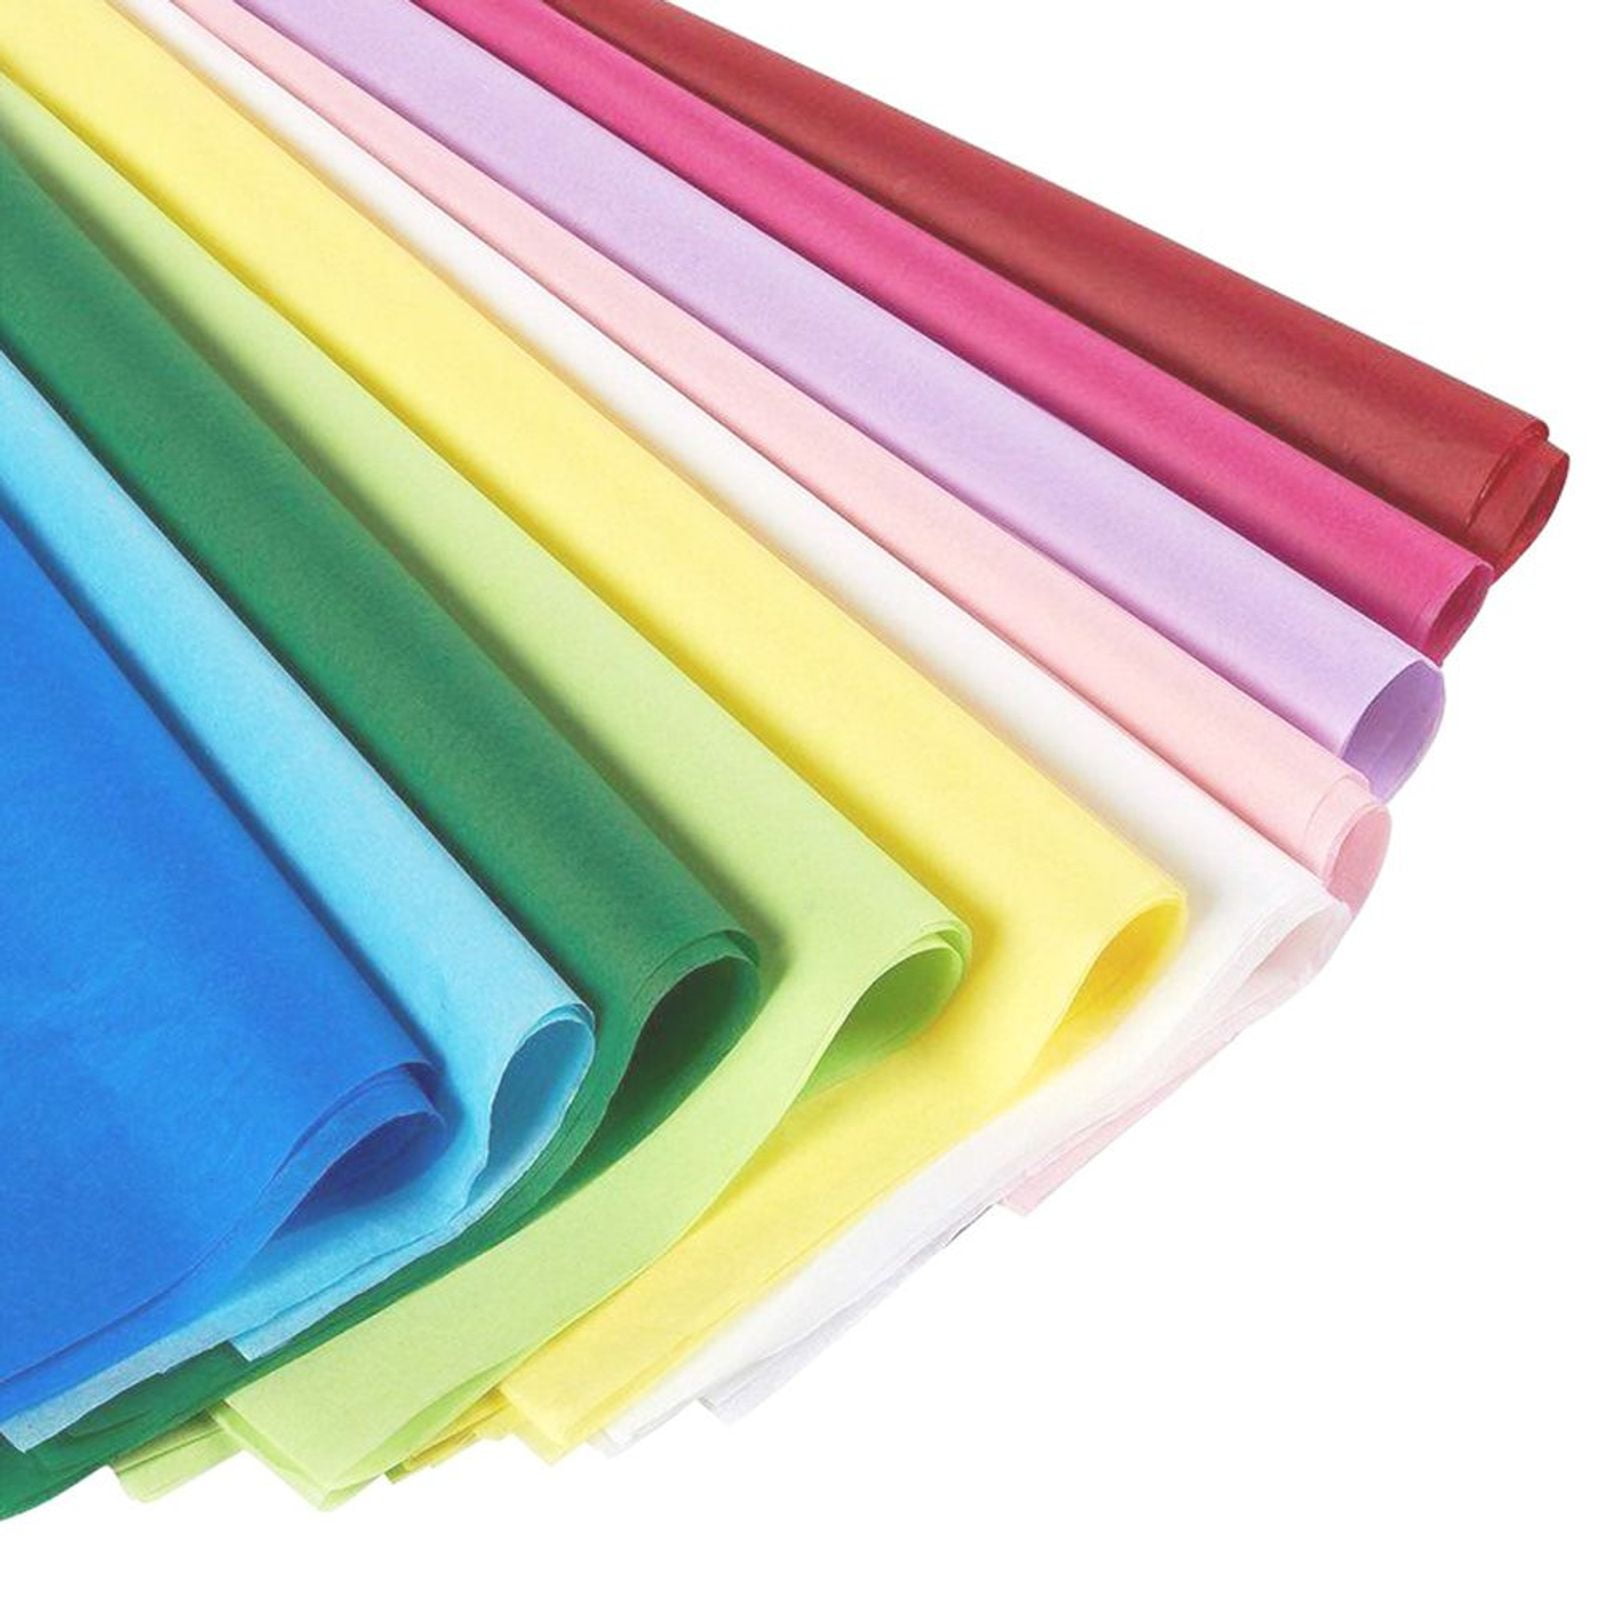 12x Arts & Crafts Colorful Crepe Paper Roll Wrapping Paper Supplies Home Décor 